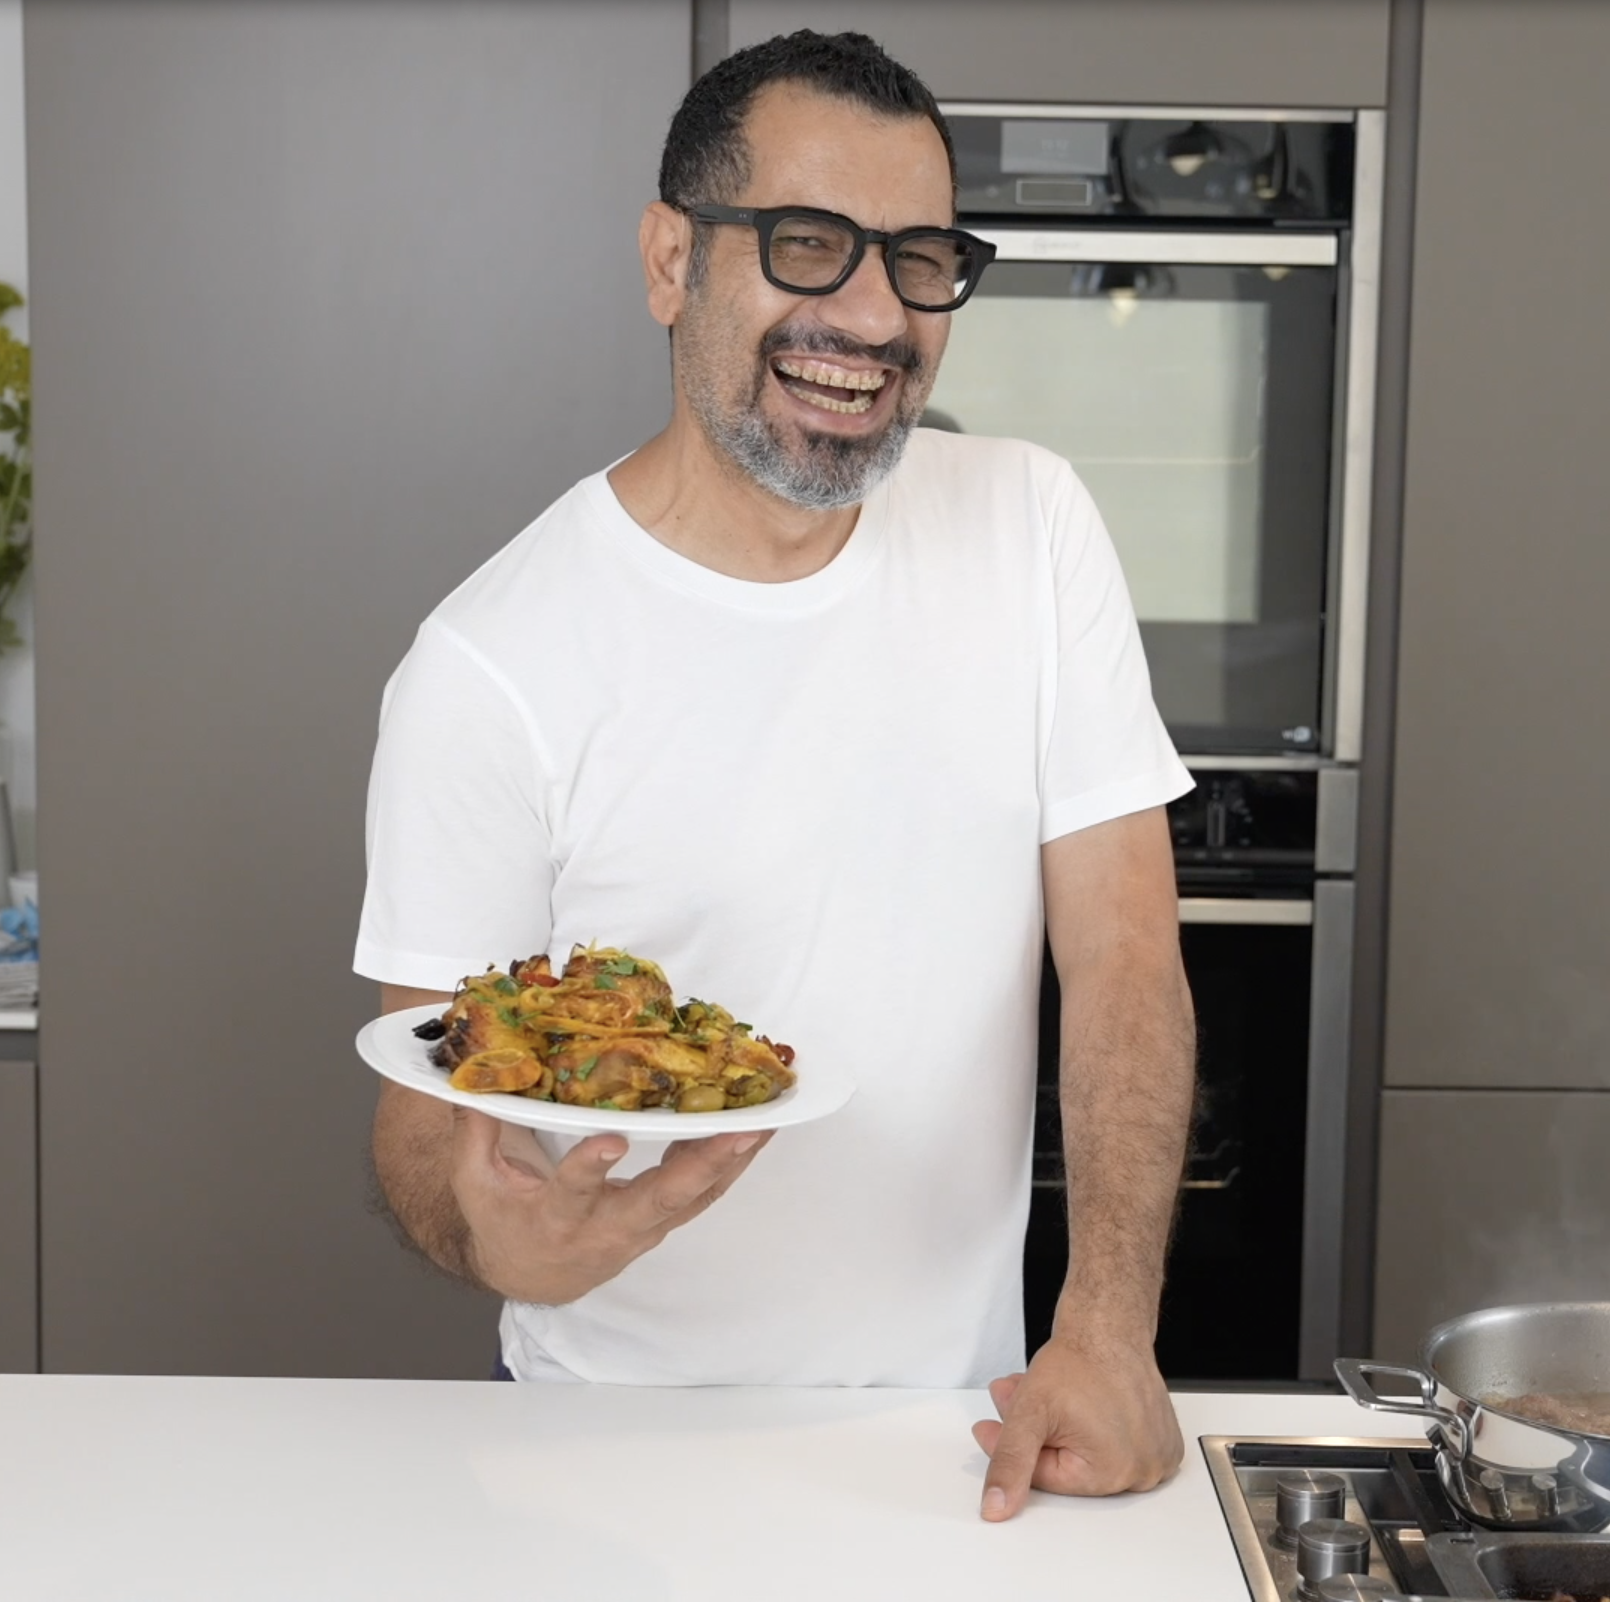 A chef wearing a white t-shirt and glasses smiles while holding a plate of moroccan chicken, standing at a kitchen counter.